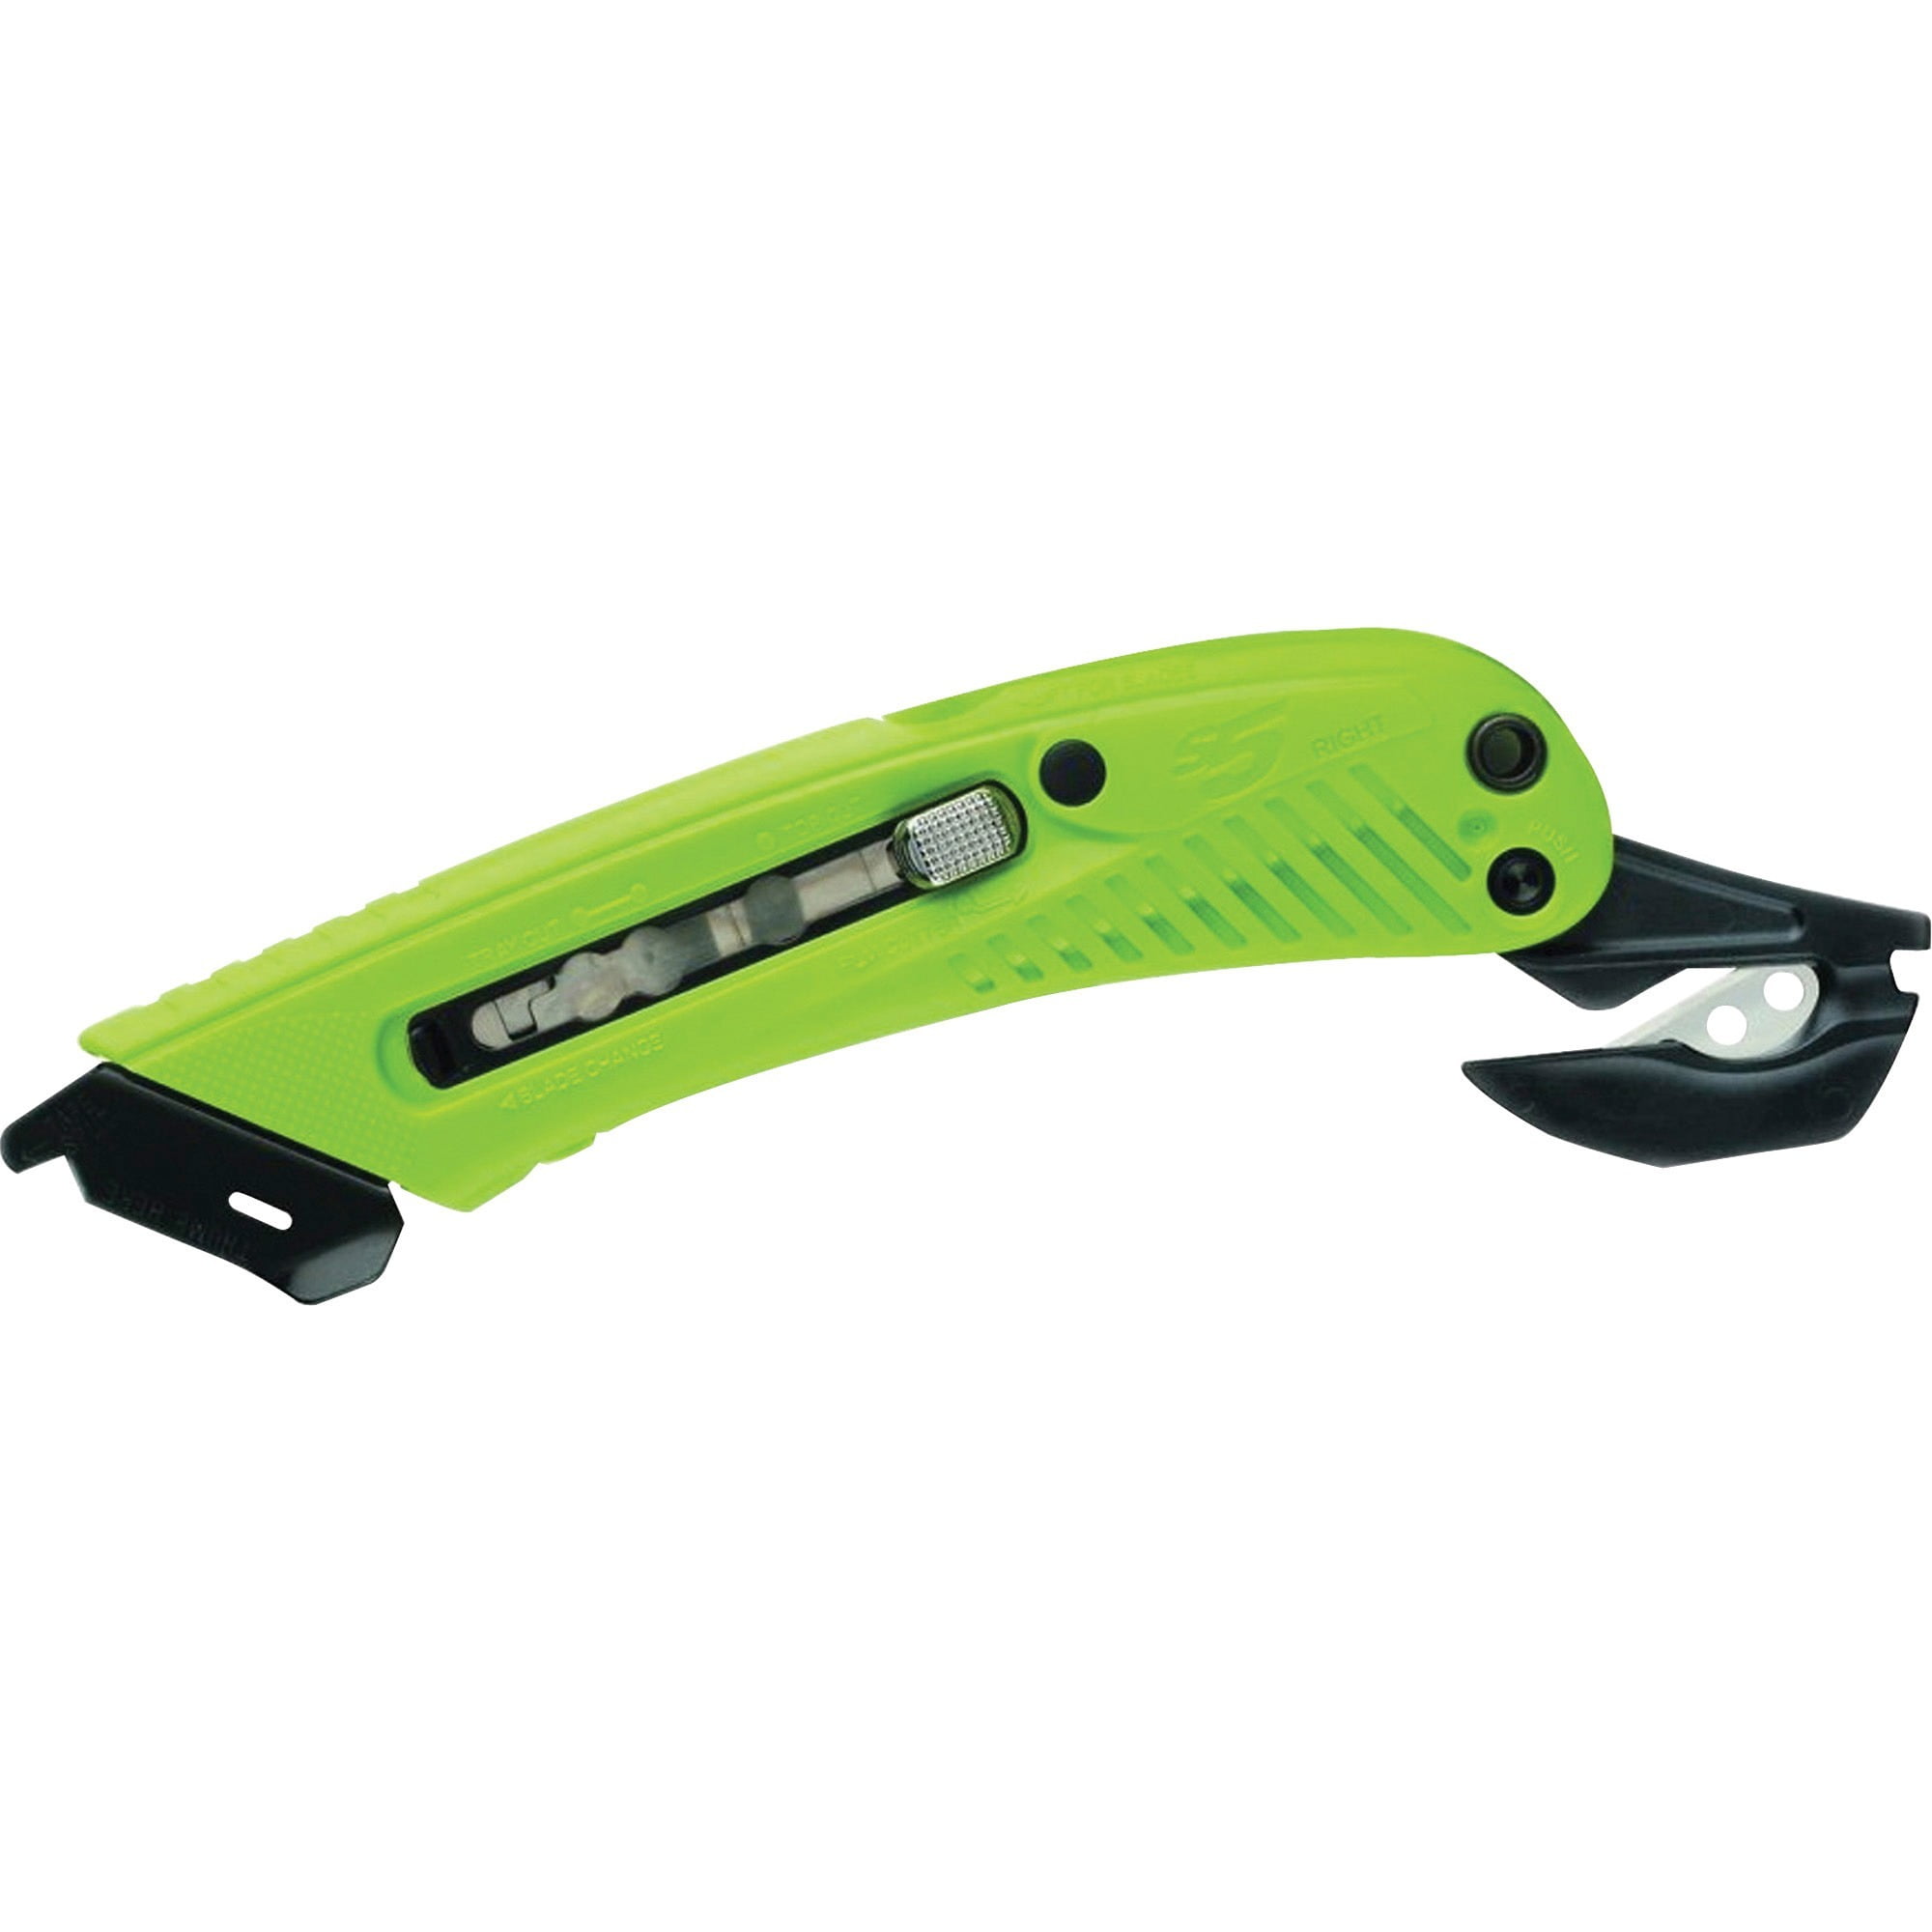 Safety Ceramic Blade Box Cutter, 0.5 Blade, 5.5 Plastic Handle, Green -  BOSS Office and Computer Products